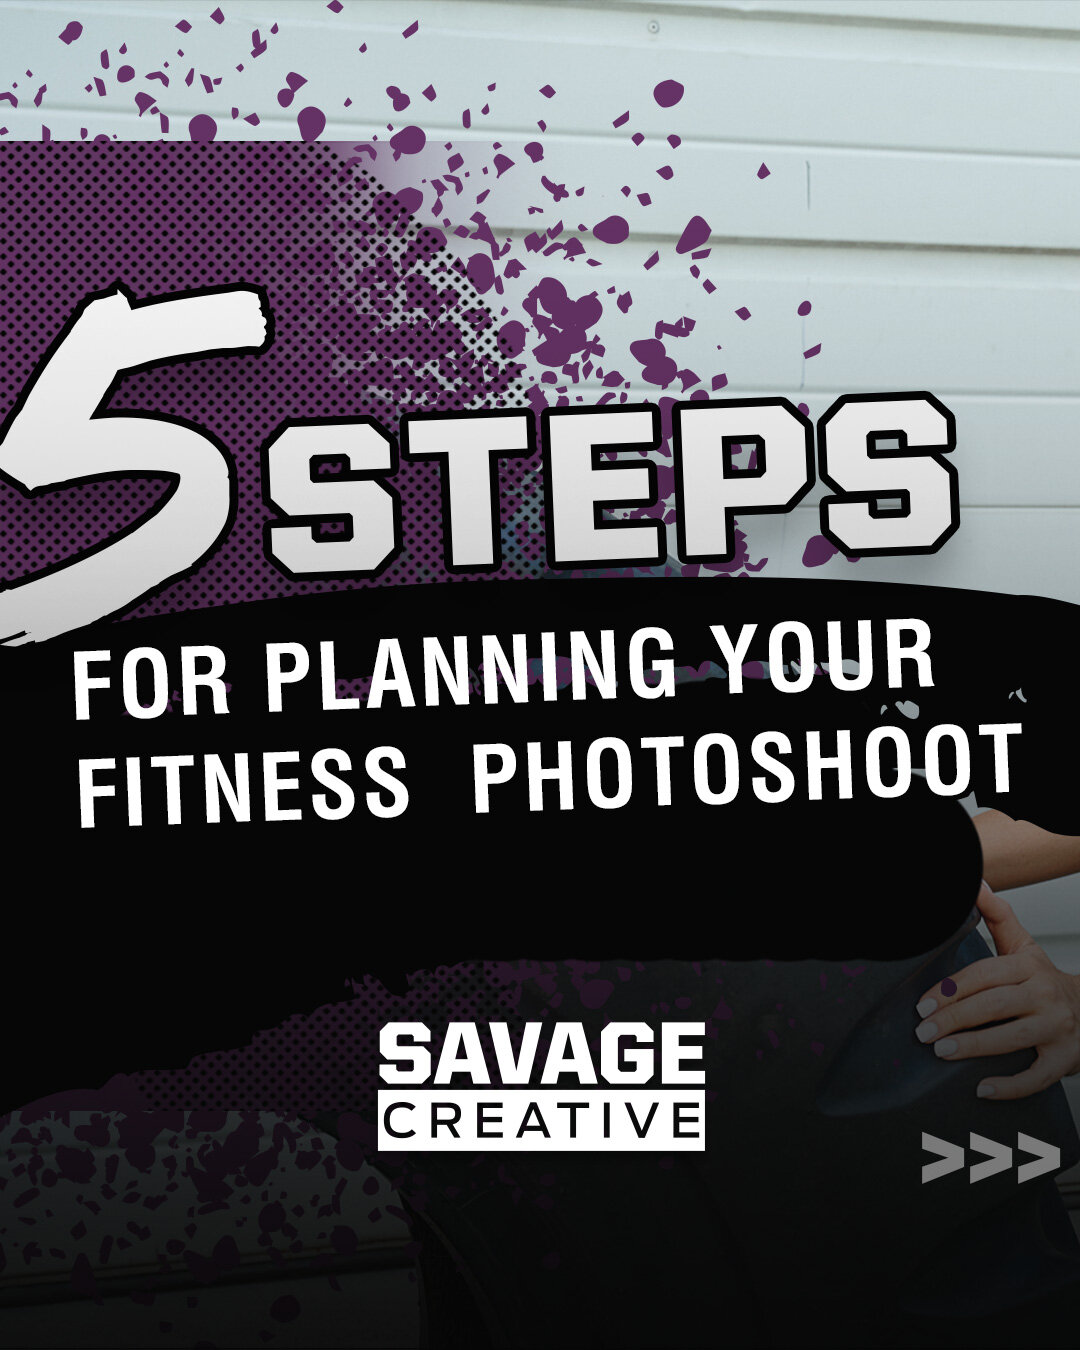 🚨🔖 5 Essential Steps for Planning your Fitness Photoshoot🔖 🚨 

a successful fitness photoshoot requires more than just showing up to take pictures. To make sure you have everything covered, follow these five steps: set a goal, find inspiration, c